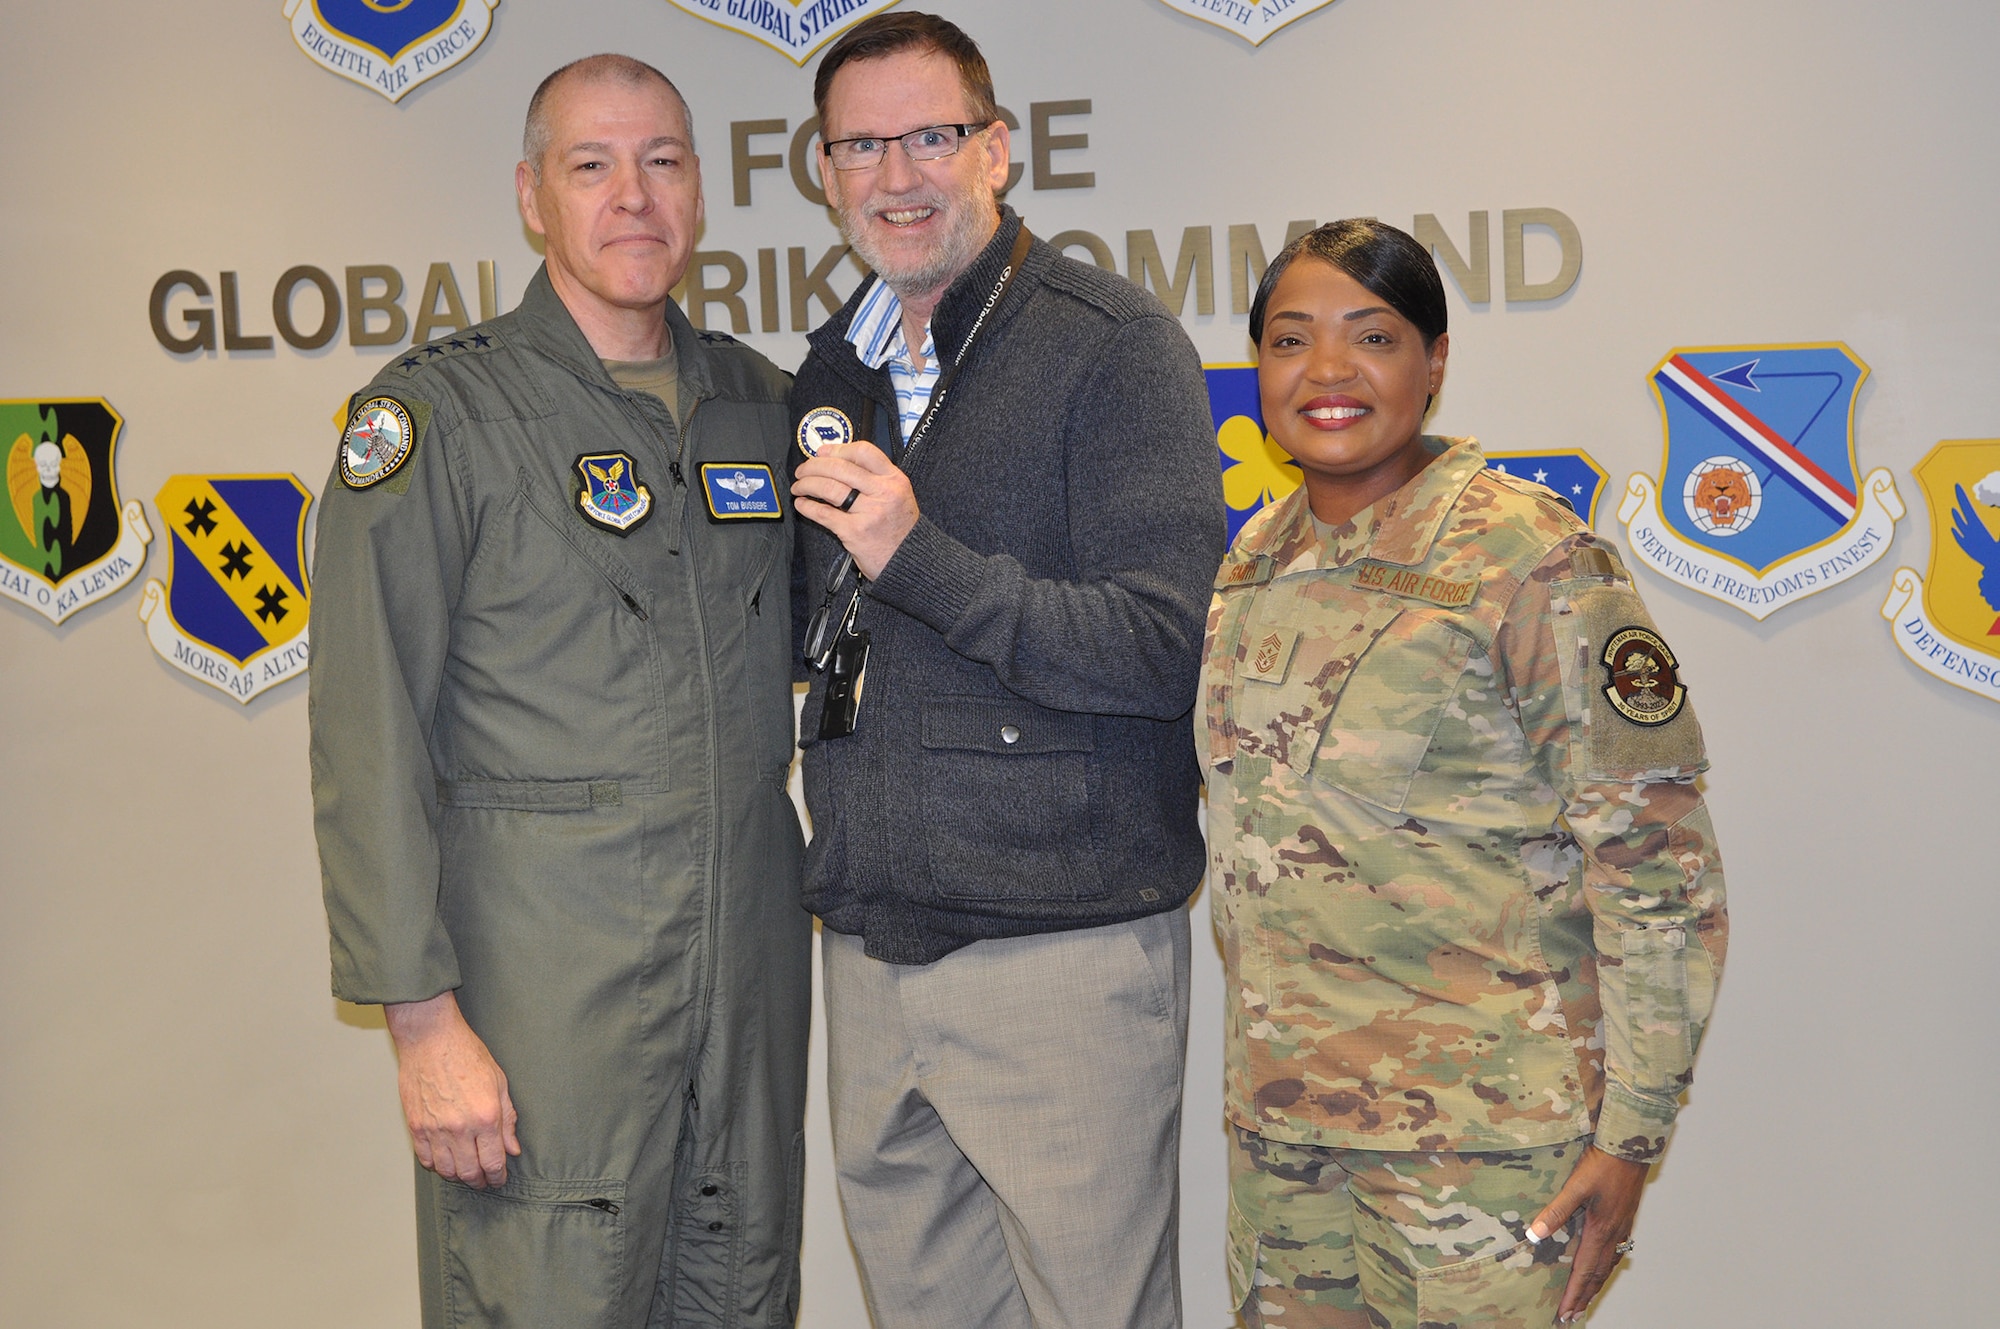 From left, Gen. Thomas Bussiere, commander of Air Force Global Strike Command; Andrew Robinson, logistics programmer in AFGSC’s A4 Directorate; and Chief Master Sgt. Melvina Smith, command chief of AFGSC, pose together for a photo at Barksdale Air Force Base, Louisiana, Dec. 18, 2023. Robinson was coined by Bussiere and recognized by AFGSC leadership for his years of outstanding performance in the command’s Weapon Systems Sustainment Branch managing helicopter maintenance, services and acquisition contracts for the command and the Air Force as well as being the Department of the Air Force’s Outstanding Air Force Services Program Manager of the Year in 2022. (U.S. Air Force Courtesy Photo)